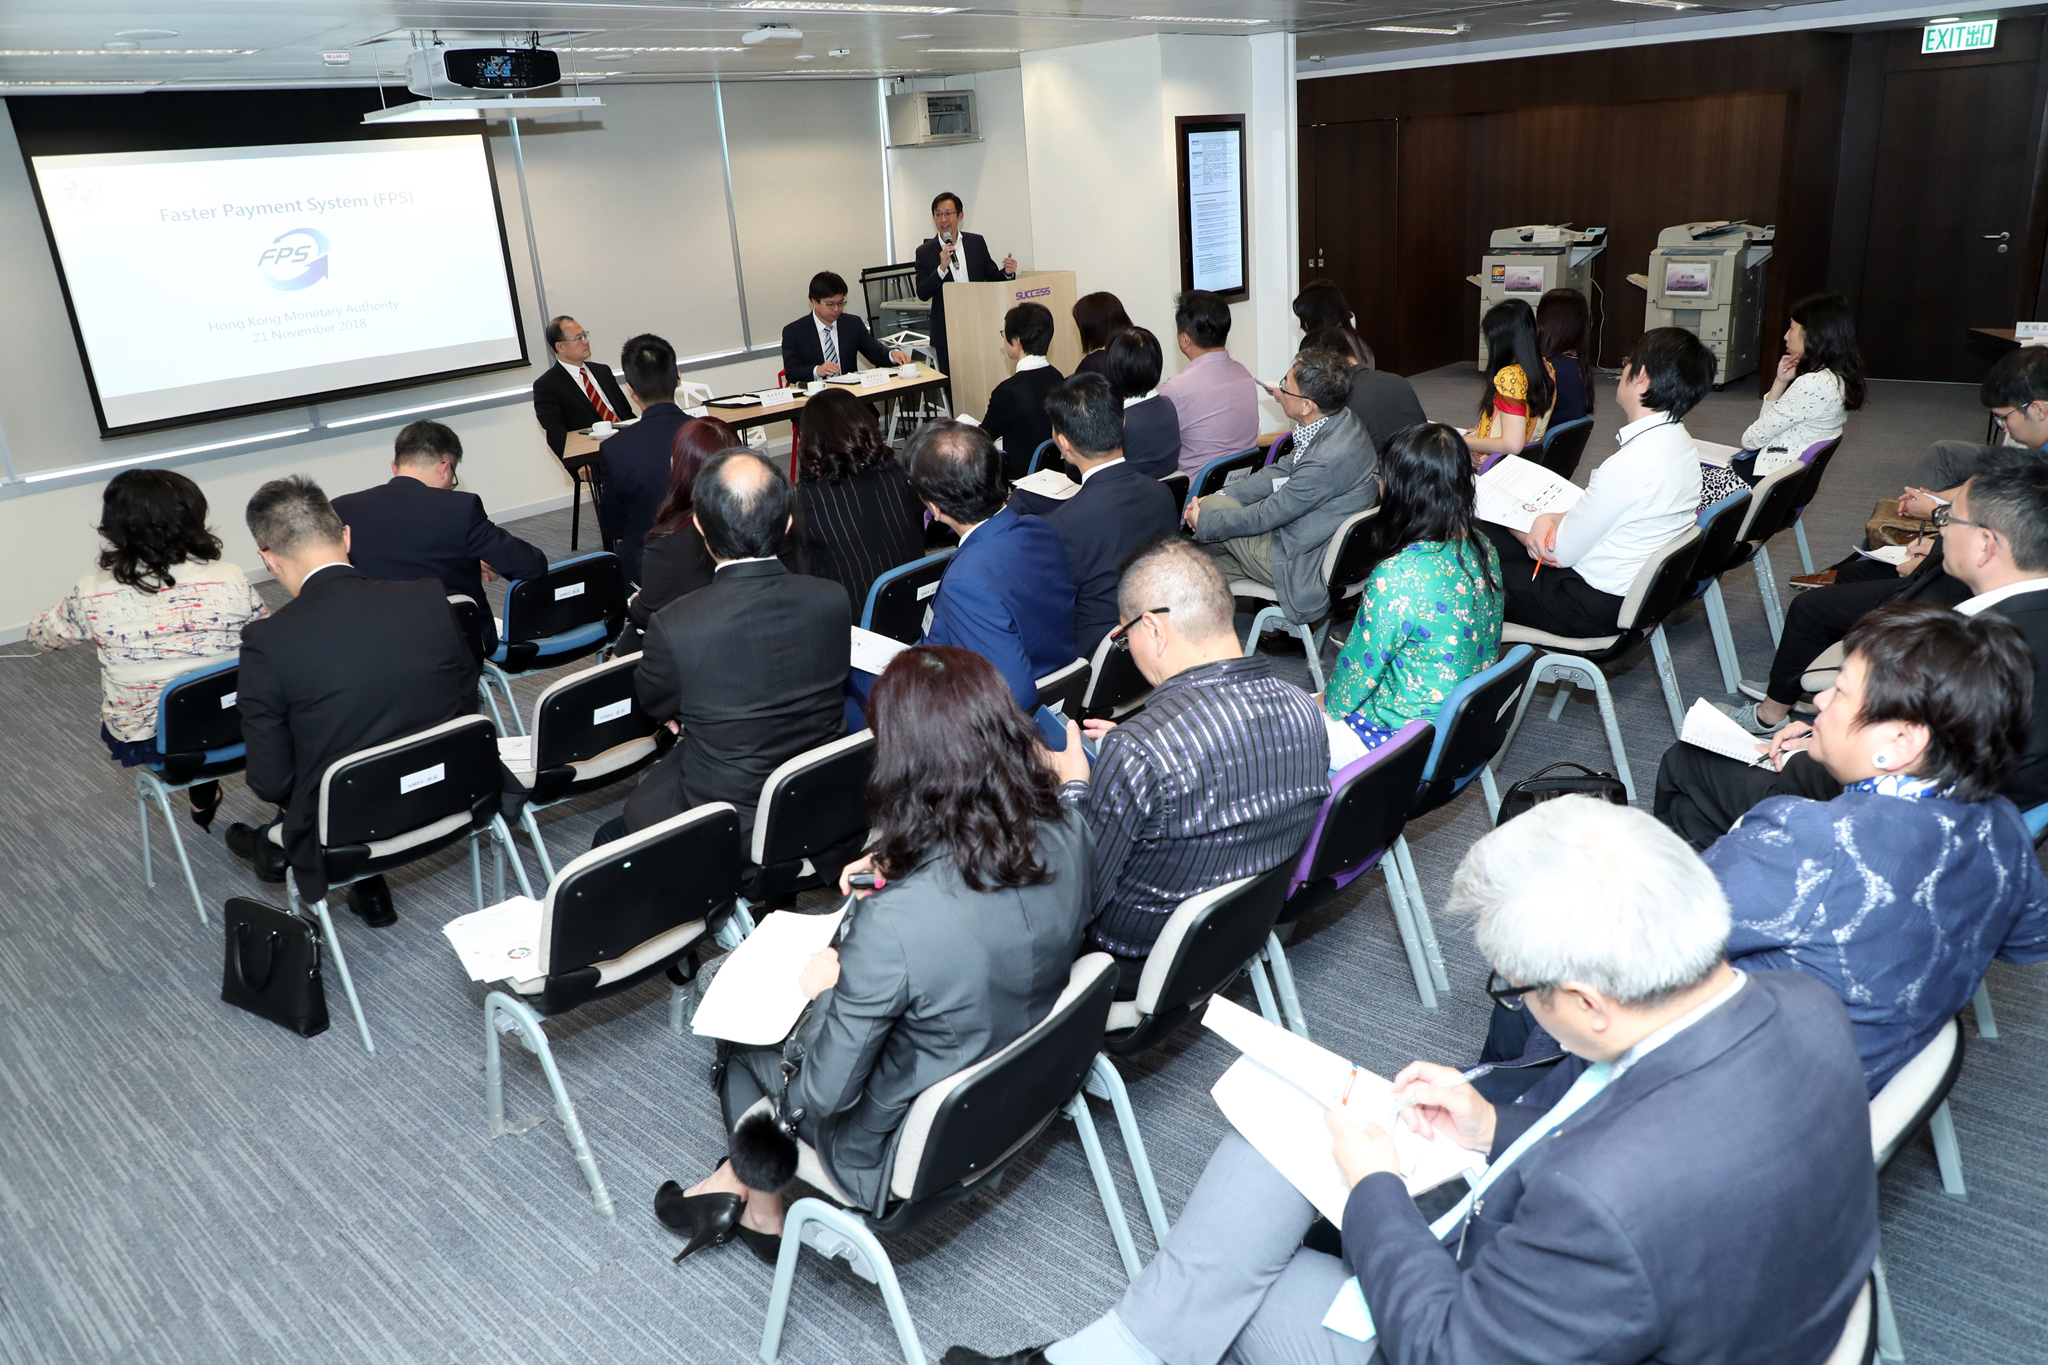 Photo25 : The Small and Medium Enterprises Committee met with local SME associations on 21 November 2018 to exchange views on the latest Fintech development in Hong Kong.  Representatives from the Hong Kong Monetary Authority were invited to introduce the recently launched Fintech initiatives, including Faster Payment System, Virtual Banking and Common QR Code.